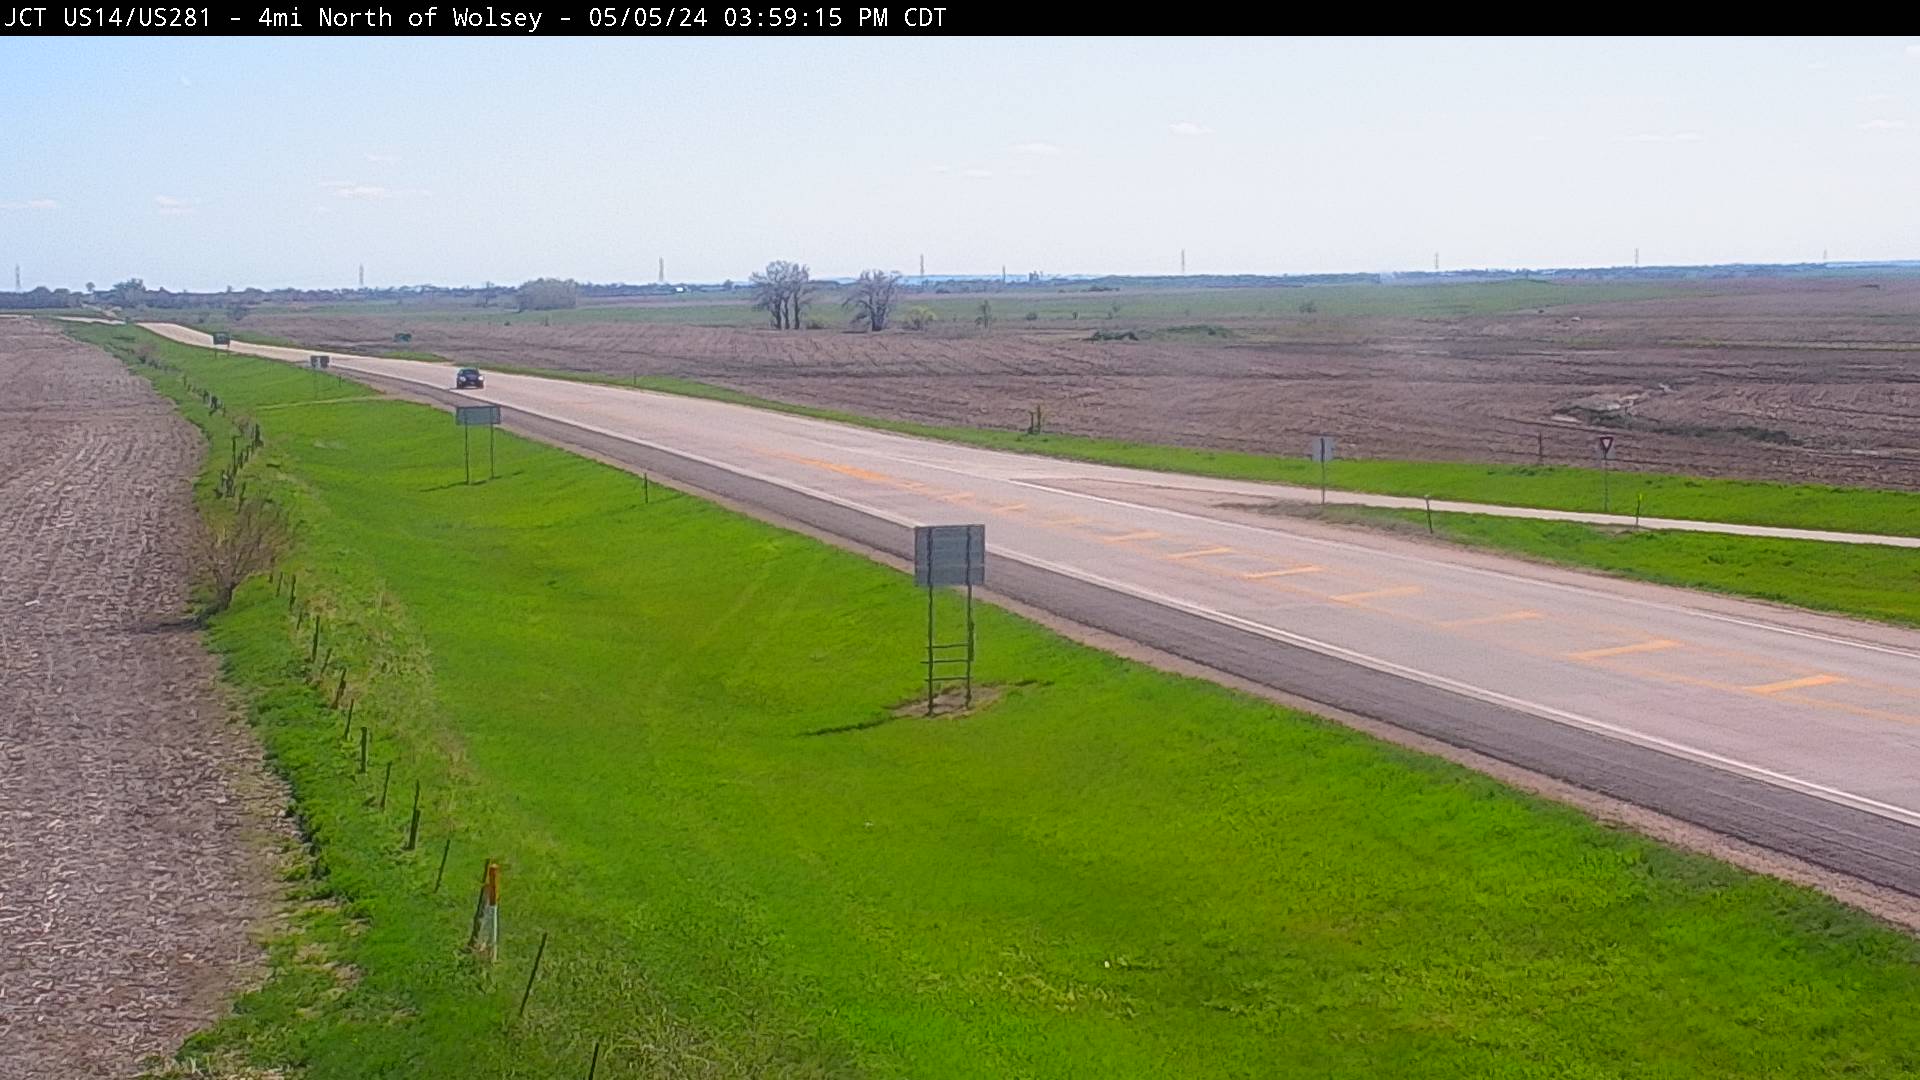 4 miles north of town at junction US-14 & US-281 - South Traffic Camera